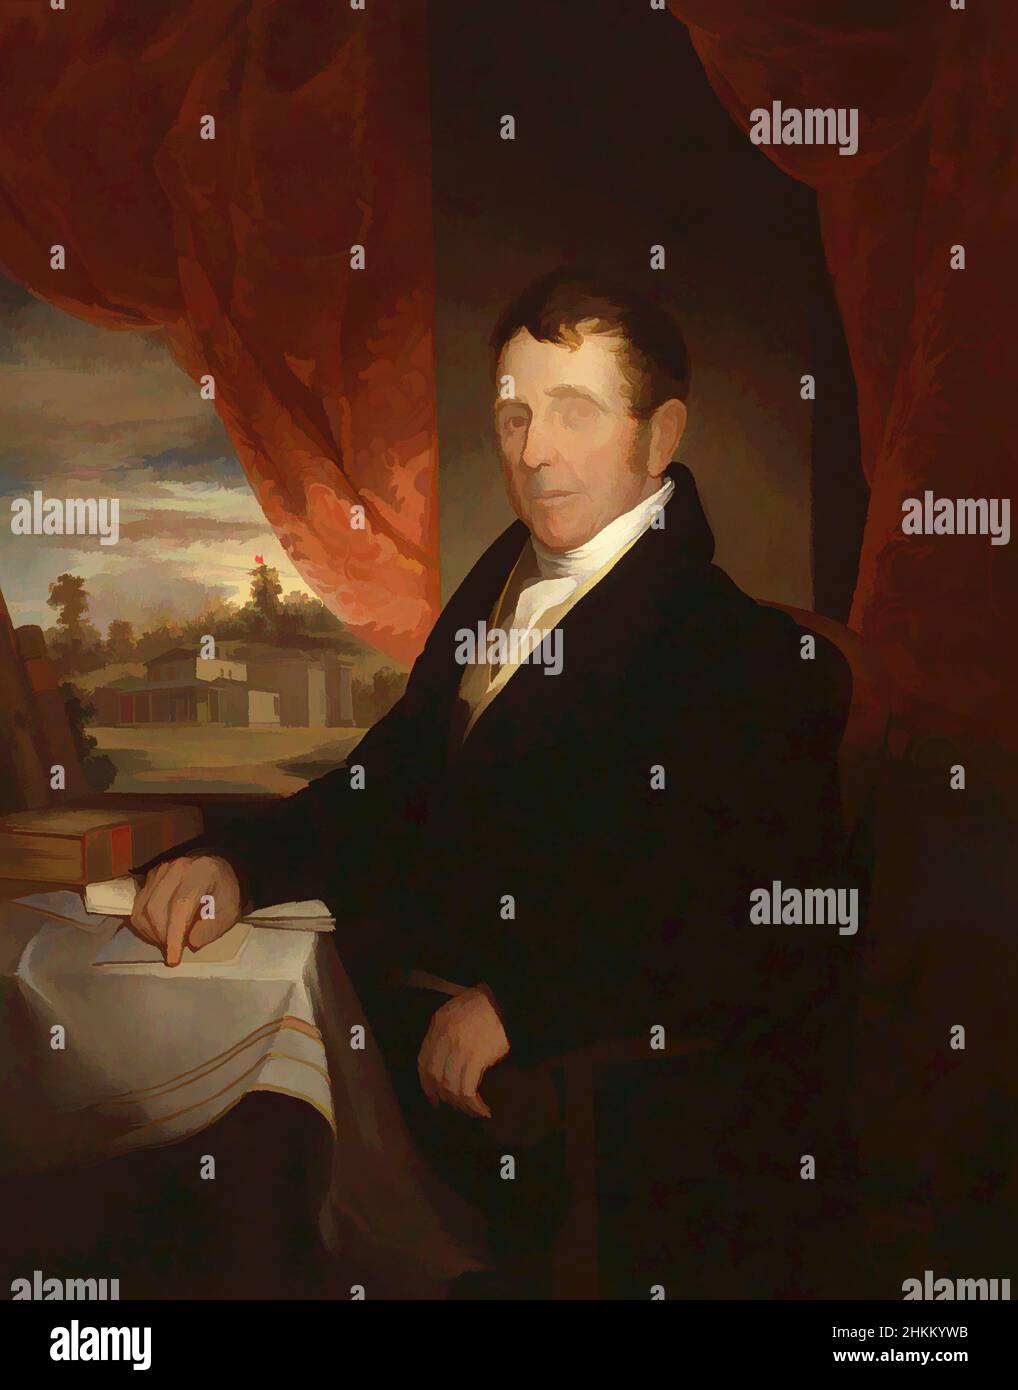 Art inspired by George Clarke, Samuel Finley Breese Morse, American, 1791-1872, 1829, Oil on canvas, Made in New York, New York, United States, North and Central America, New York, United States, North and Central America, Paintings, 43 1/8 x 34 3/4 in. (109.5 x 88.3 cm, Classic works modernized by Artotop with a splash of modernity. Shapes, color and value, eye-catching visual impact on art. Emotions through freedom of artworks in a contemporary way. A timeless message pursuing a wildly creative new direction. Artists turning to the digital medium and creating the Artotop NFT Stock Photo